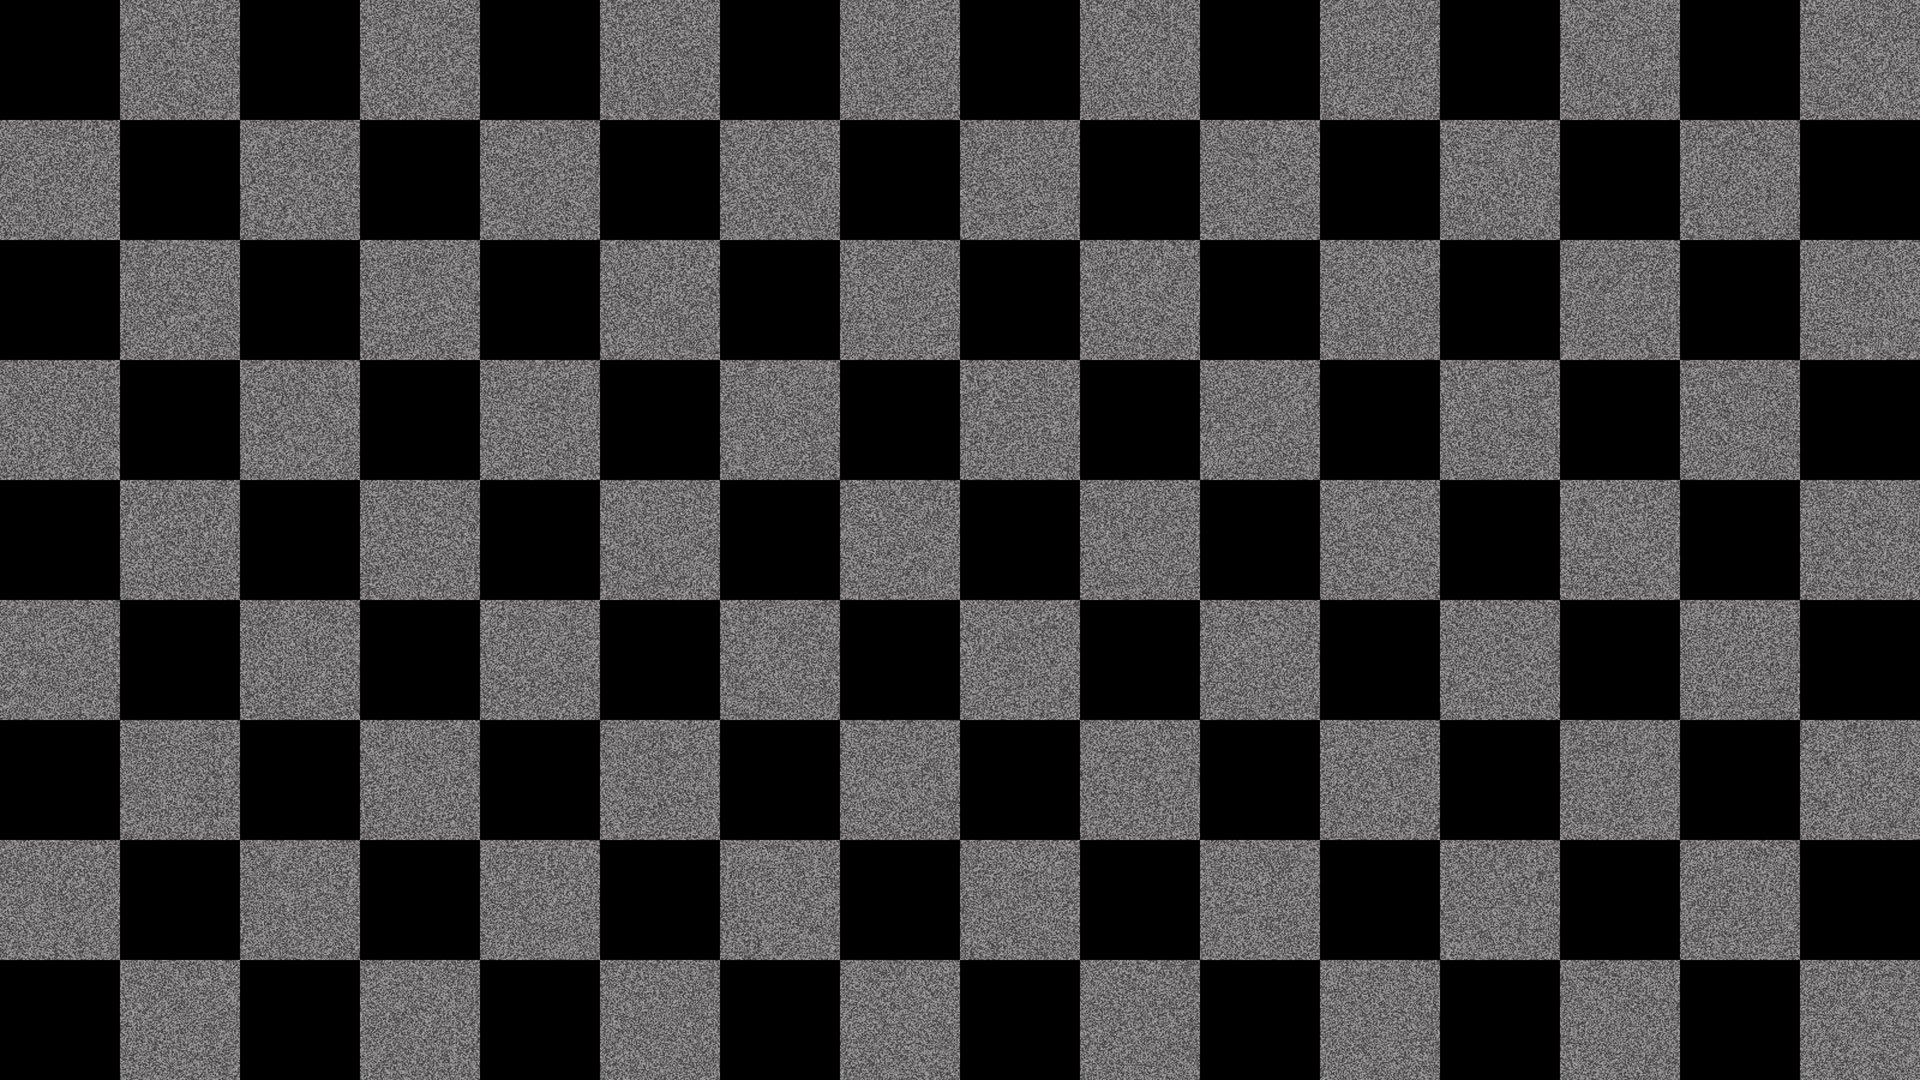 square pattern wallpaper,black,games,black and white,indoor games and sports,pattern